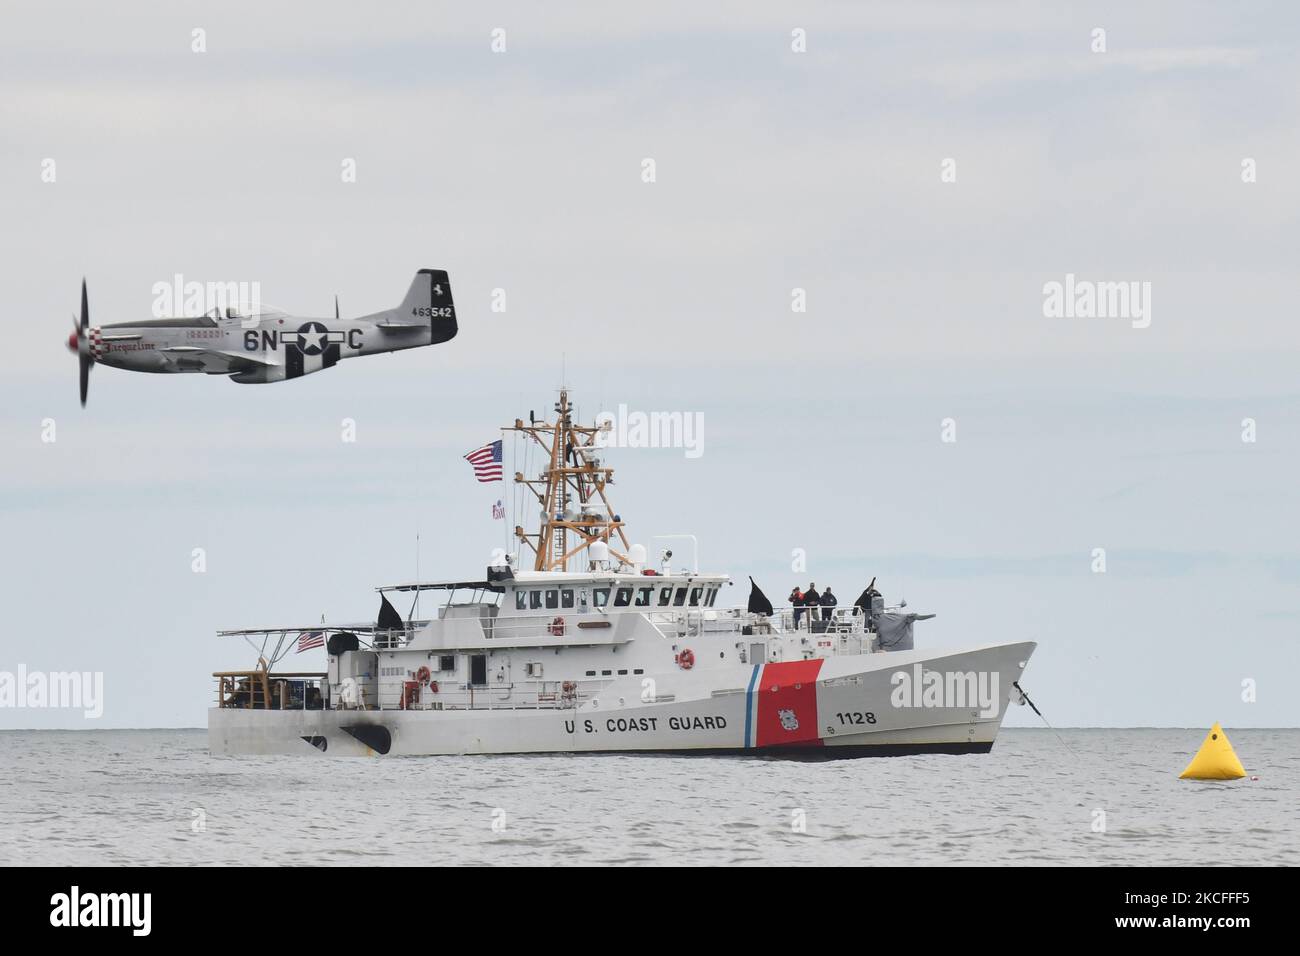 After the entire weekend of shows were canceled due to heavy storms, an improvised Memorial Day airshow was held at New York's Jones Beach, featuring World War 2 aircraft from the American Airpower Museum and the U.S. Air Force Thunderbirds. Here, a World War 2-era P-51 aircraft flies over the Coast Guard cutter Bruckenthal on 31 May 2021 in New York, US. (Photo by B.A. Van Sise/NurPhoto) Stock Photo